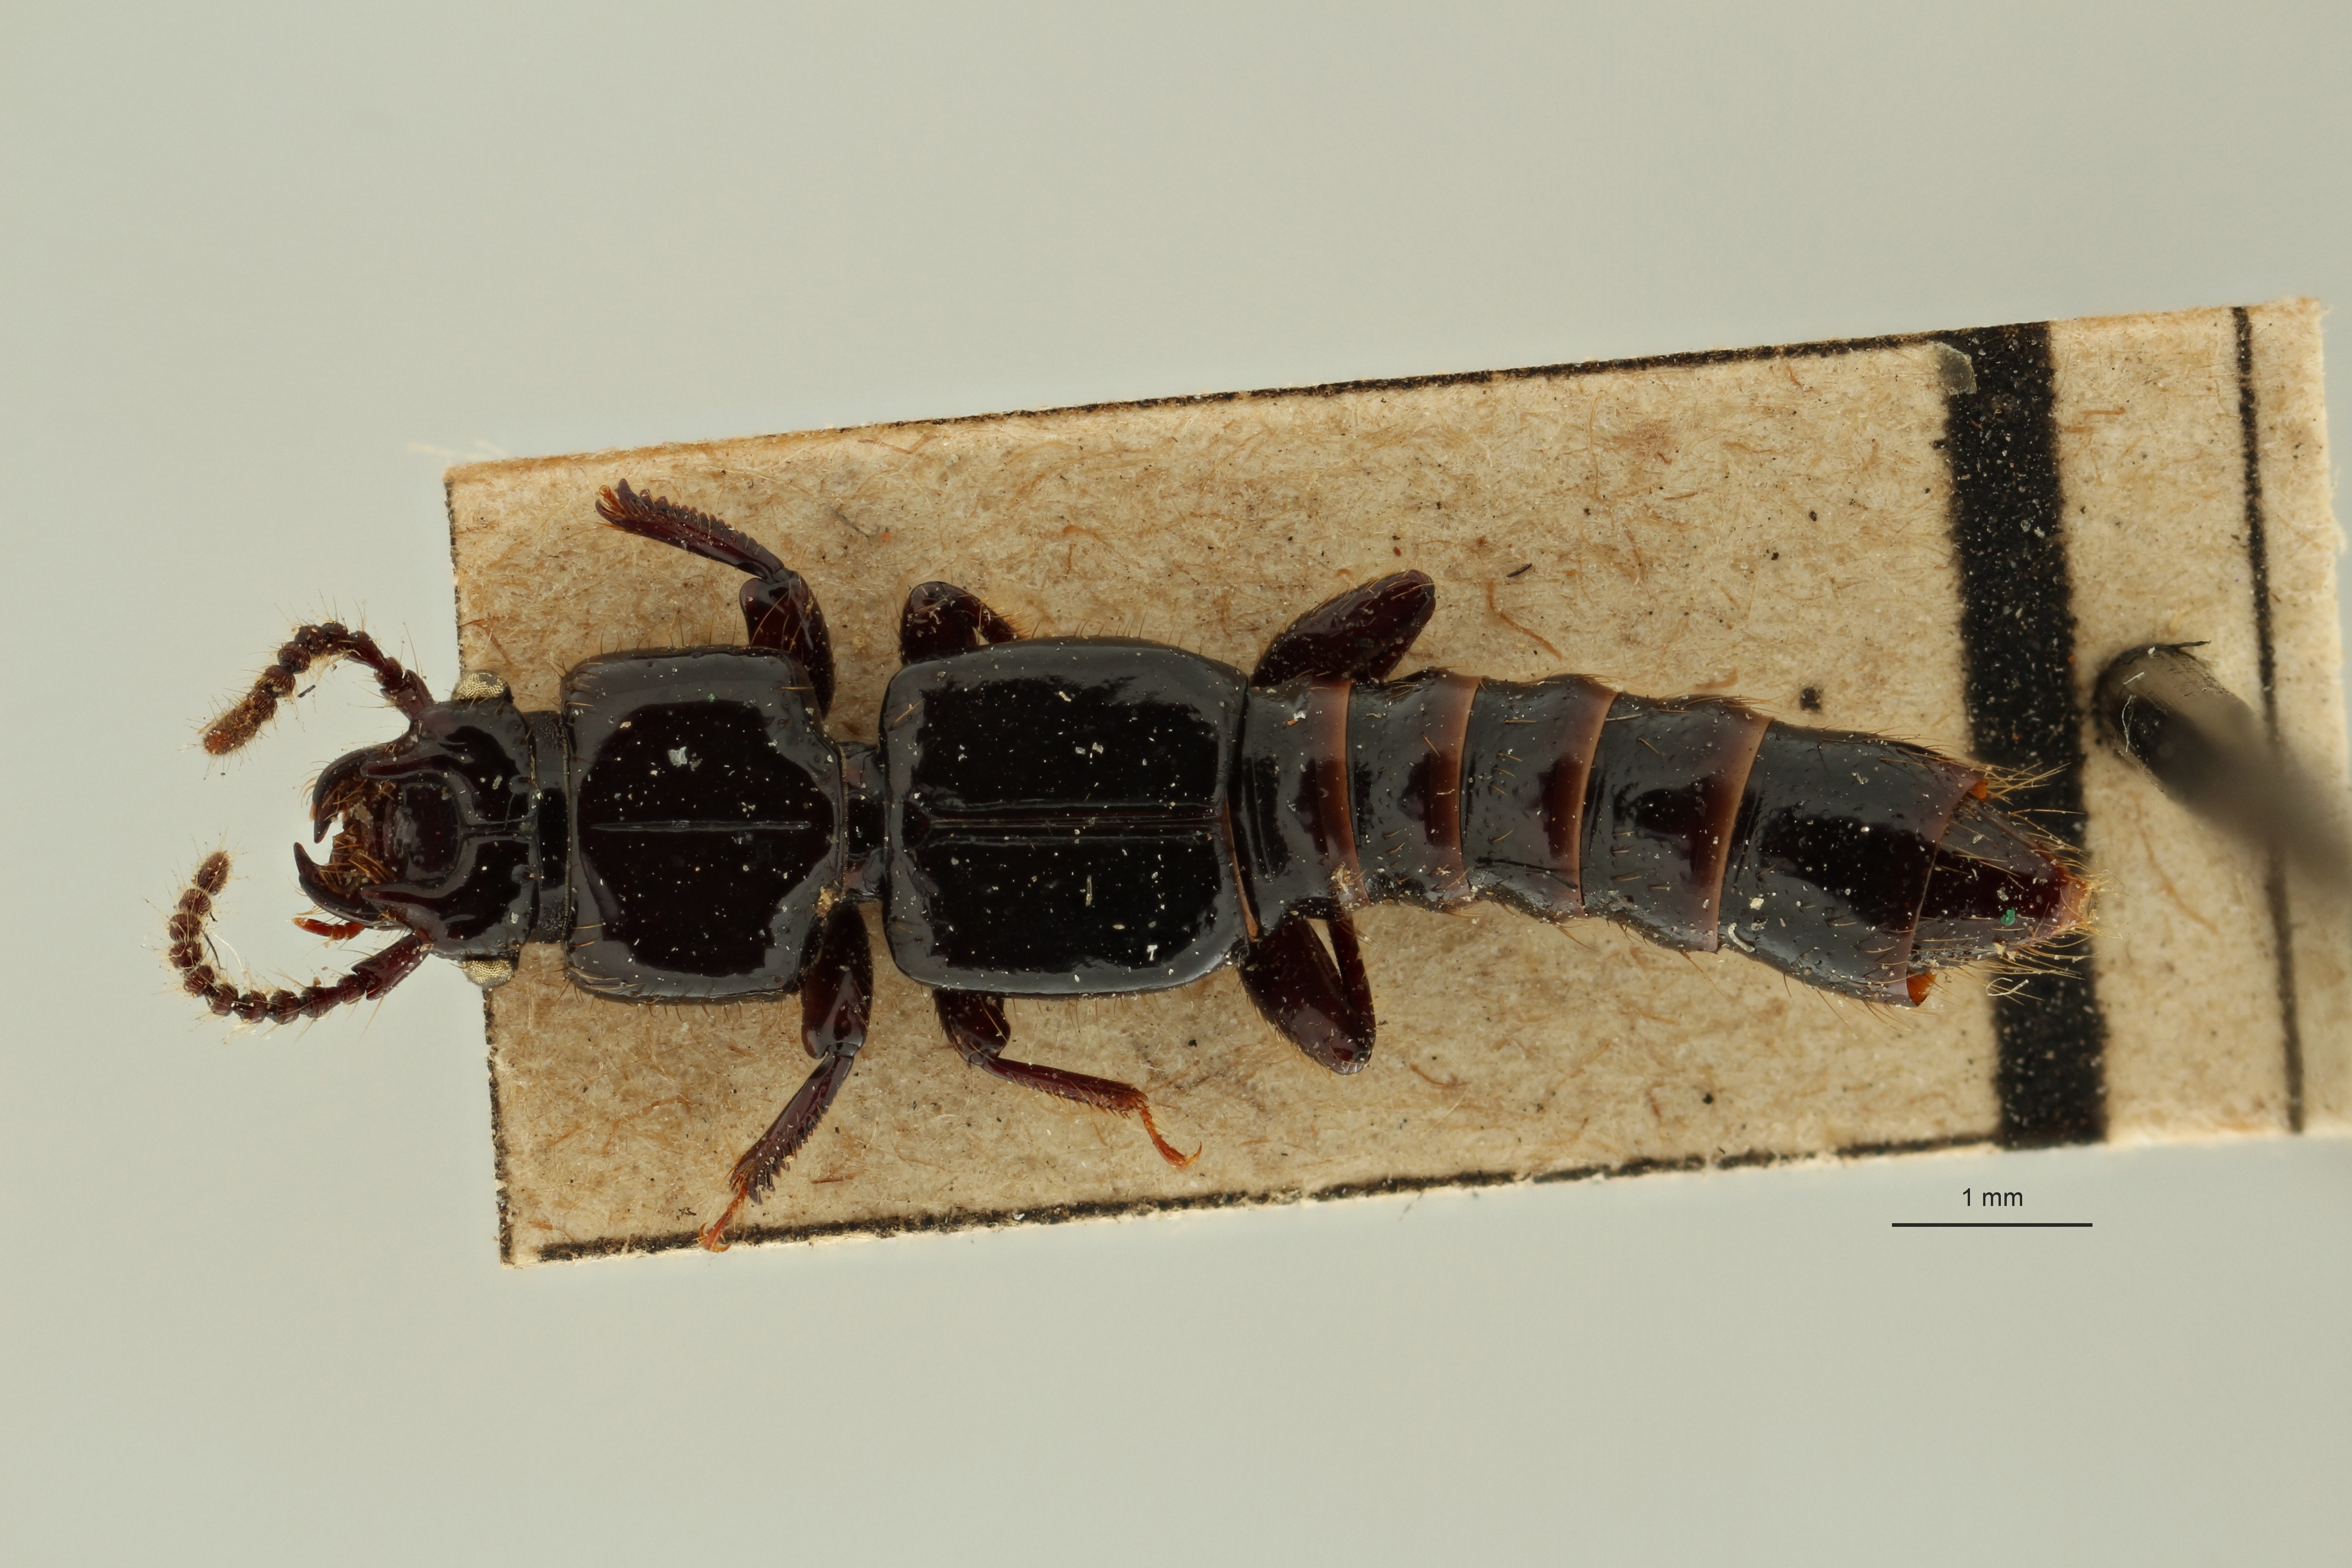 Priochirus cavifrons st D ZS PMax Scaled.jpeg